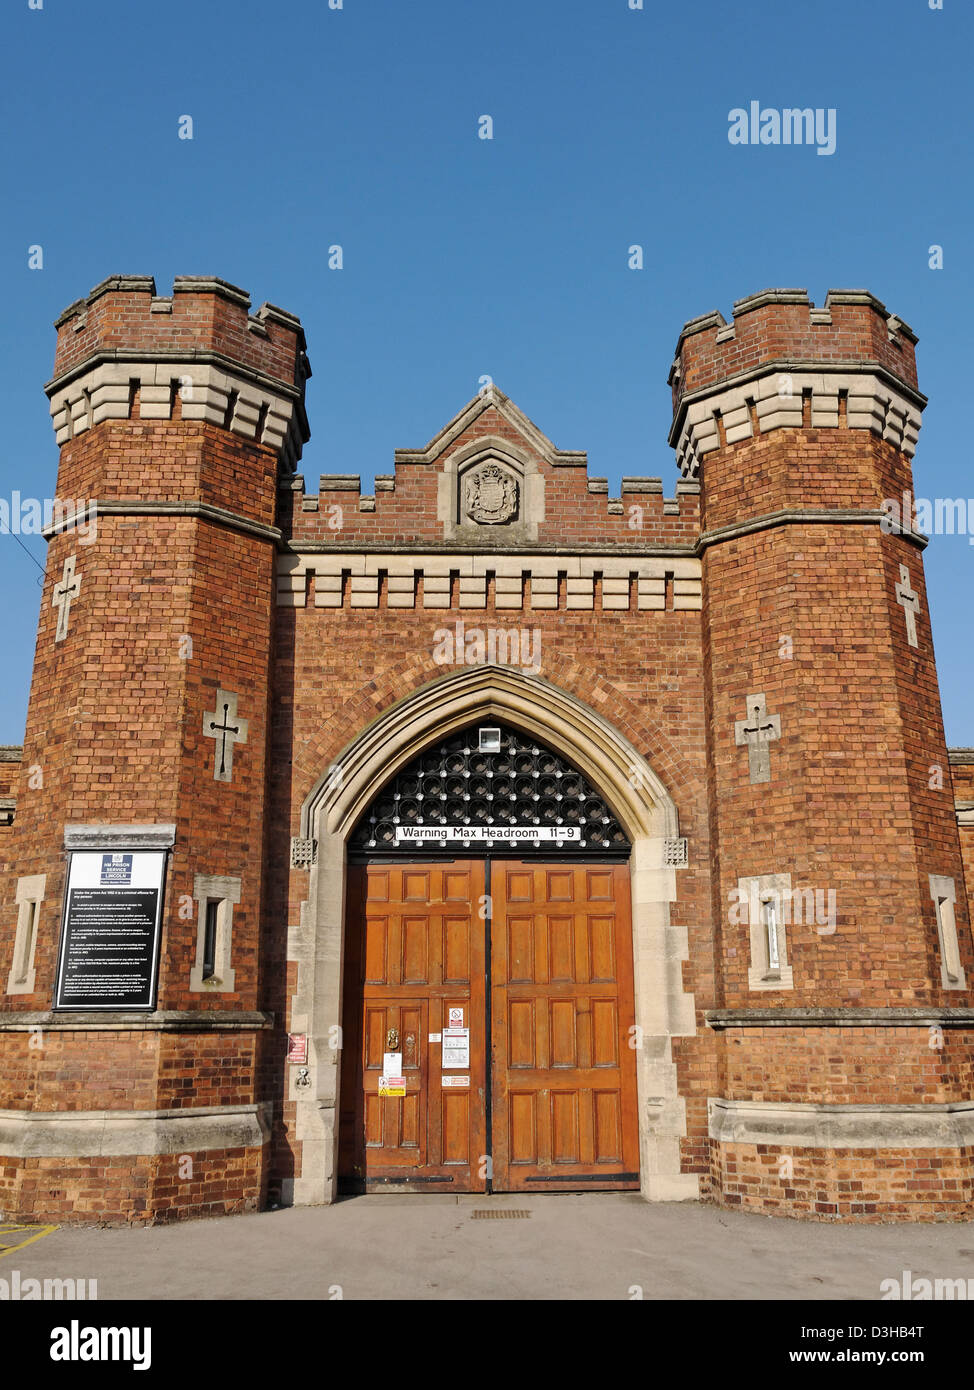 The front entrance to Her Majesty's Prison Lincoln, Lincolnshire, England. Stock Photo